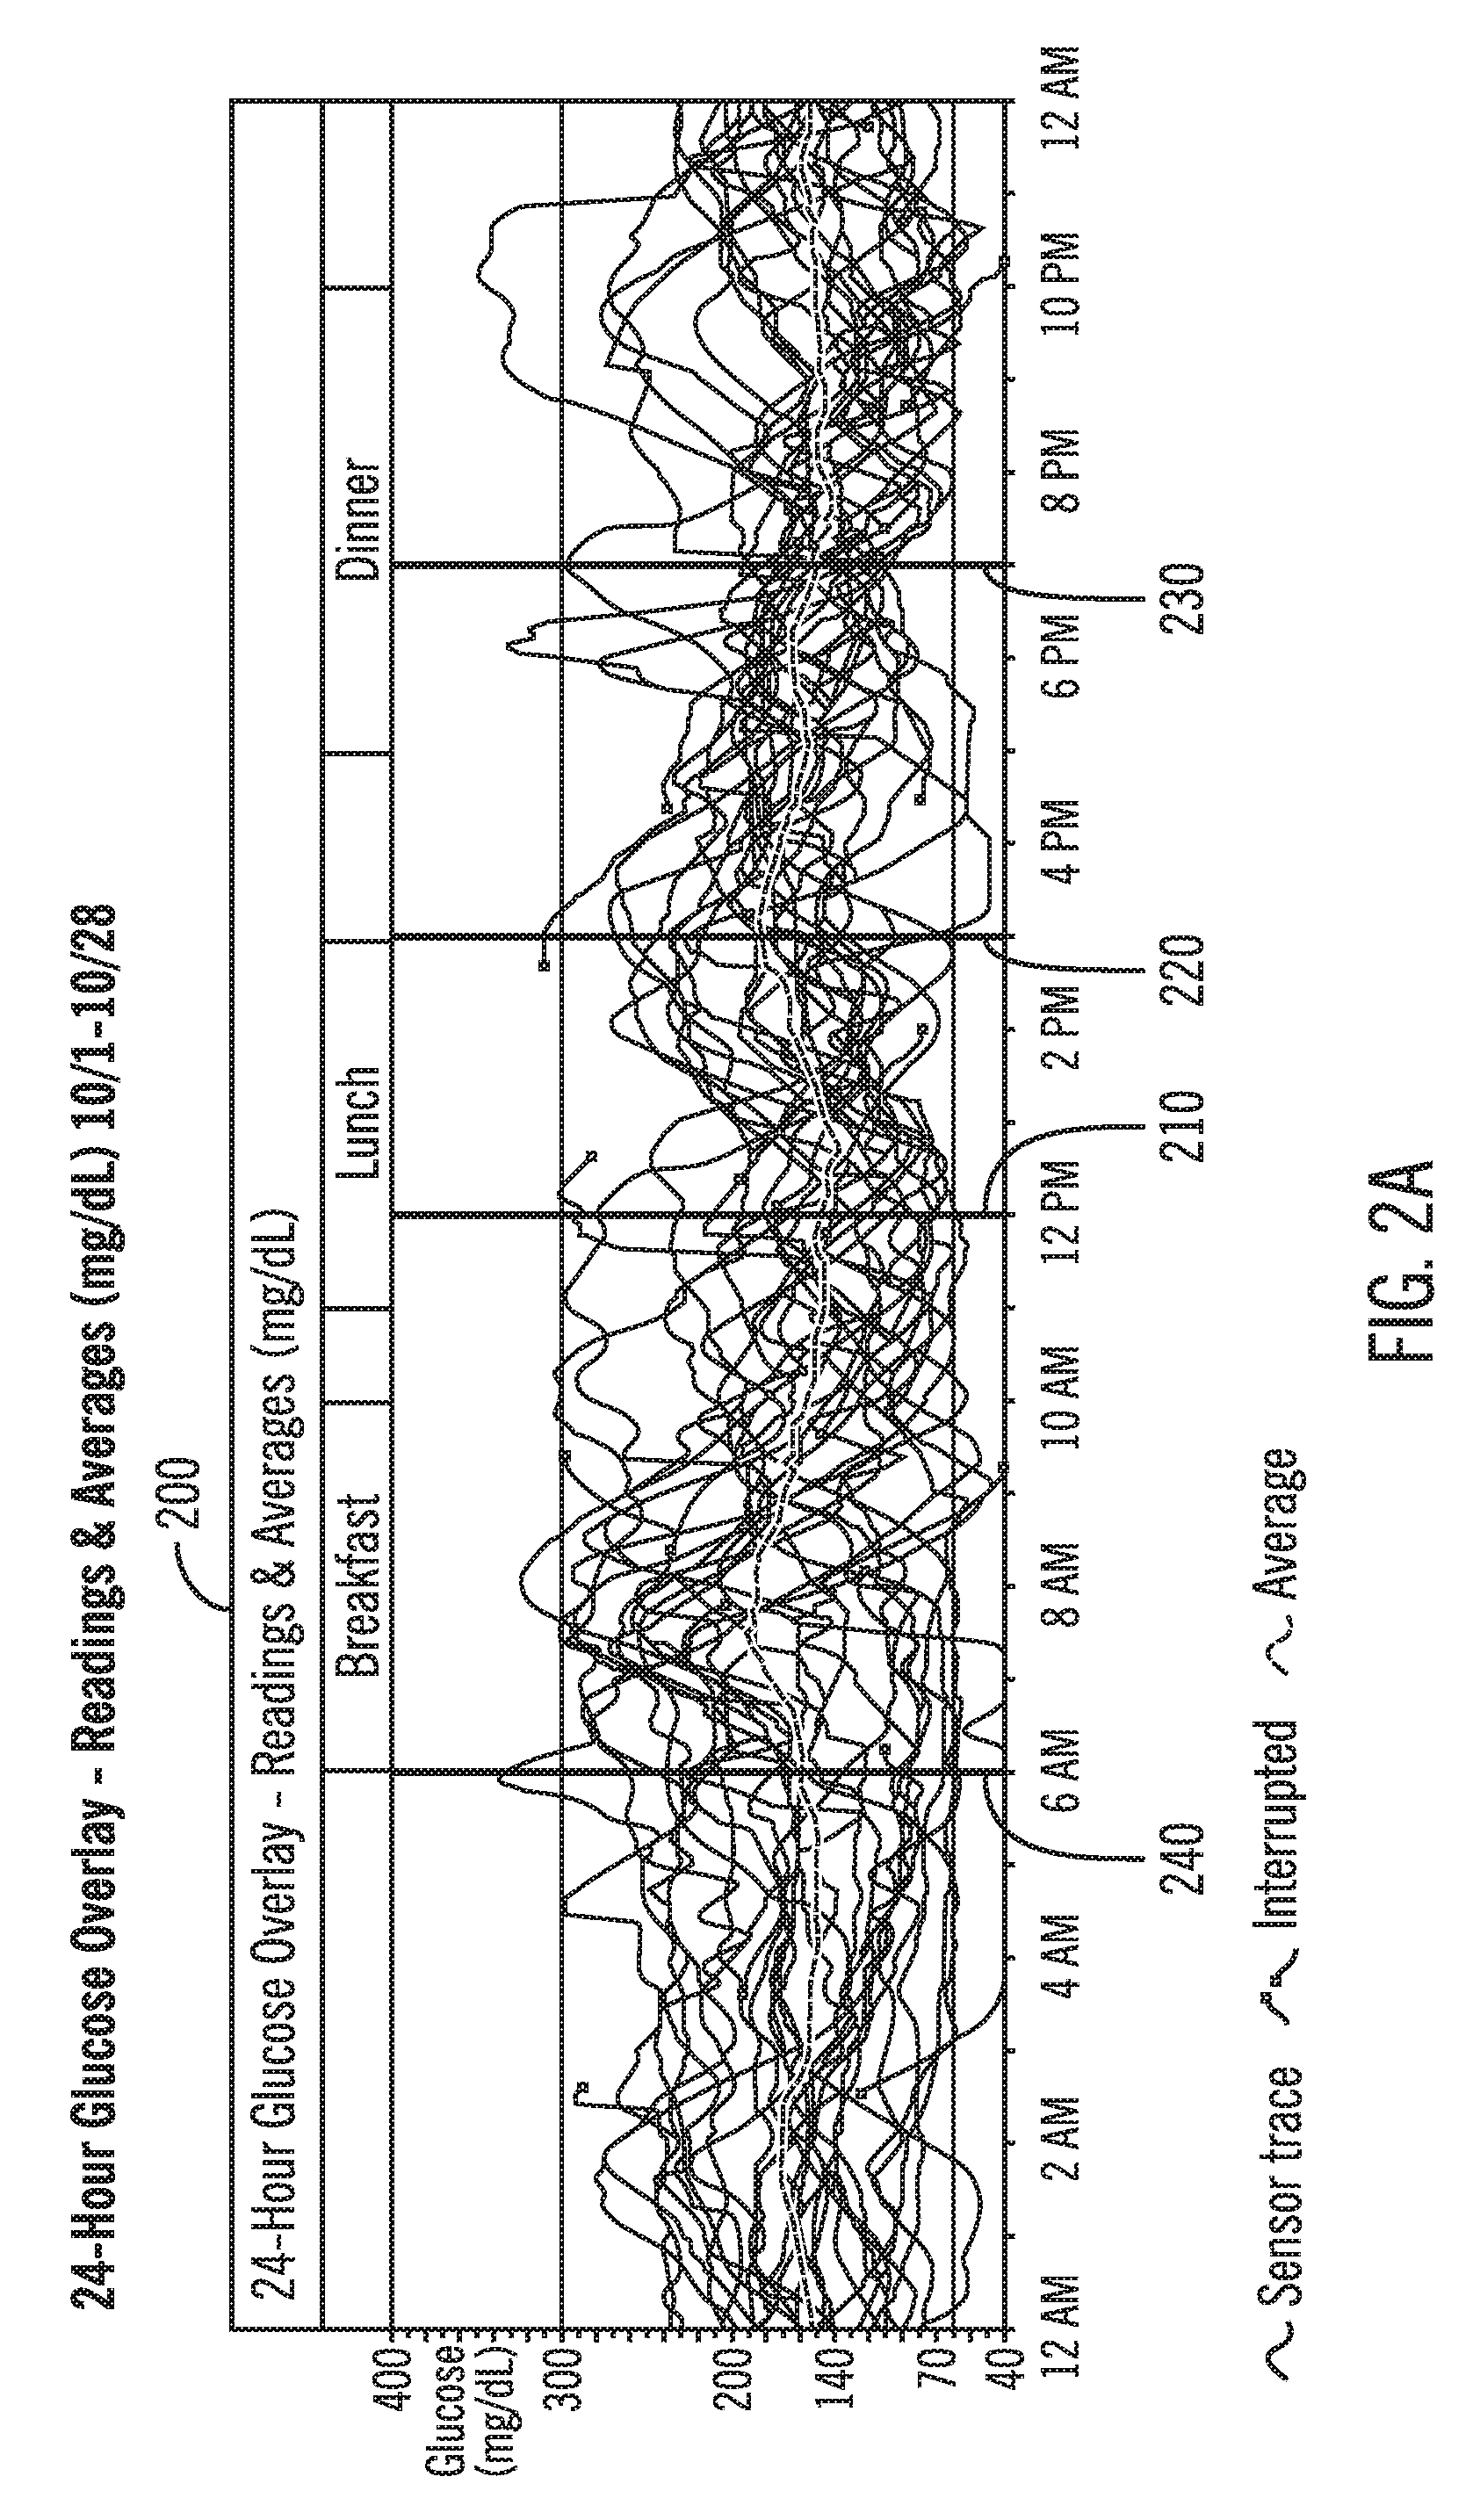 Pattern Recognition and Filtering in a Therapy Management System